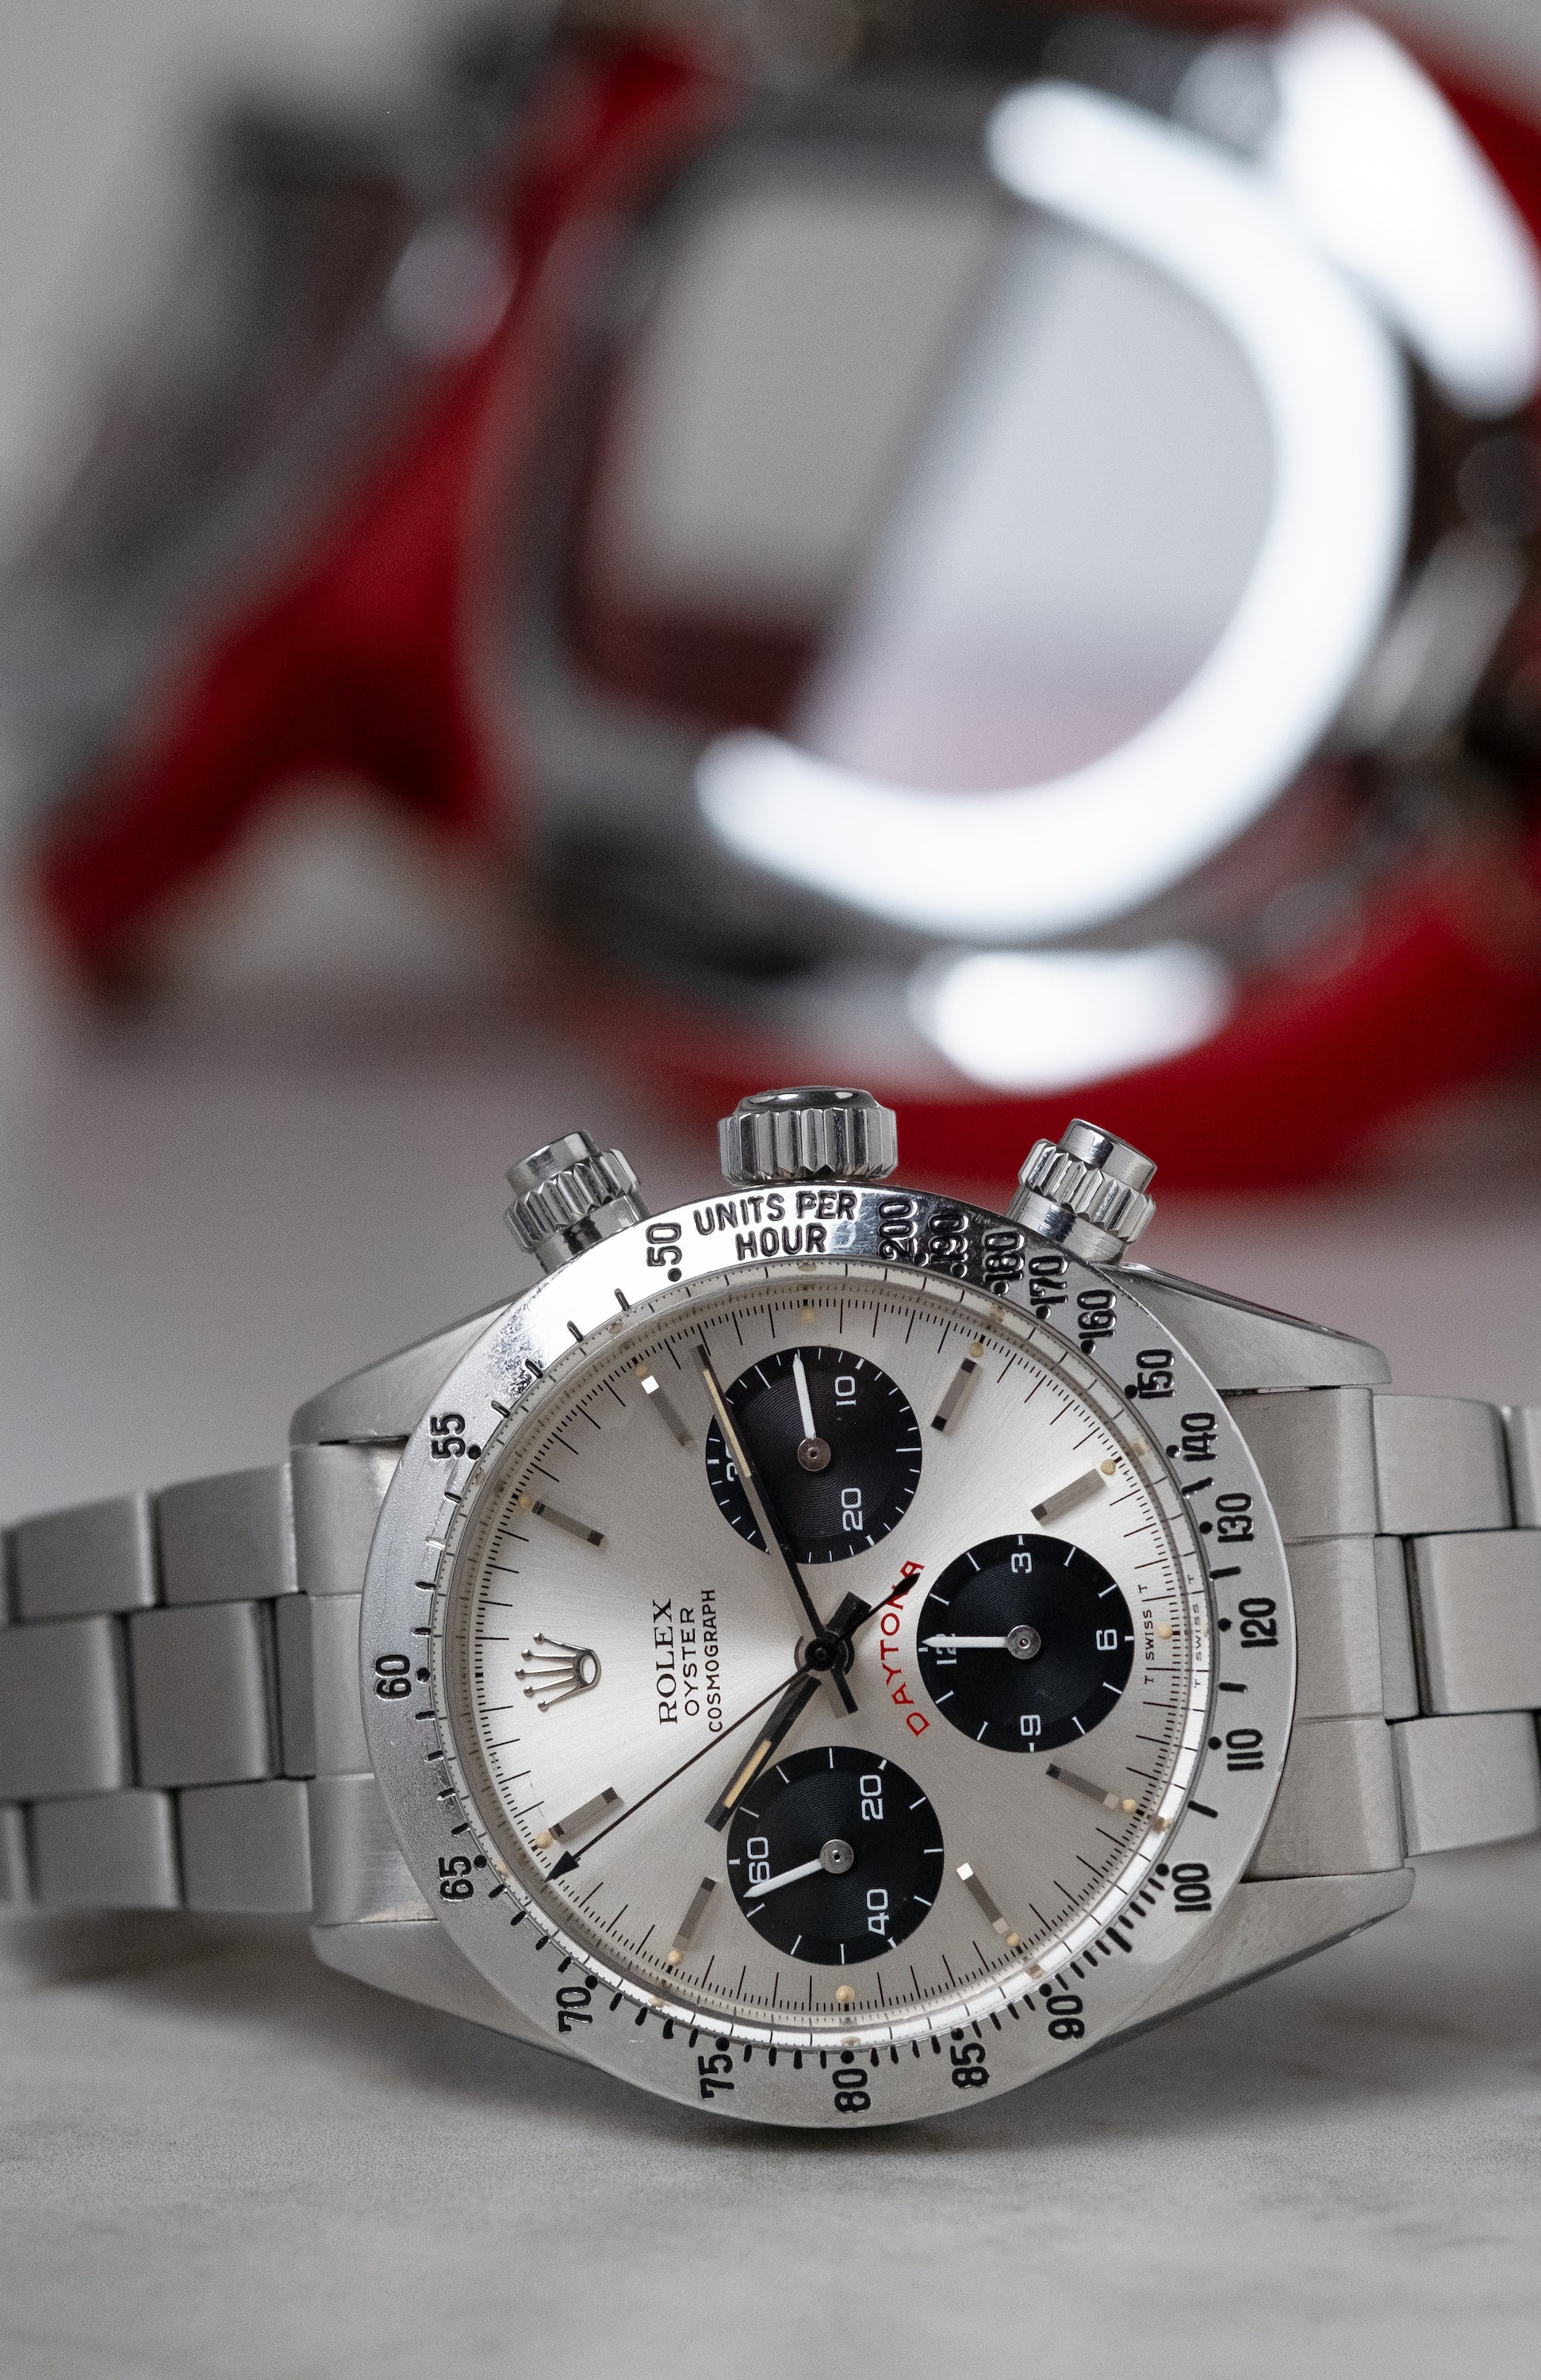 ROLEX Oyster Cosmograph Daytona Ref. 6265 Big Red Floating Dial (1976)